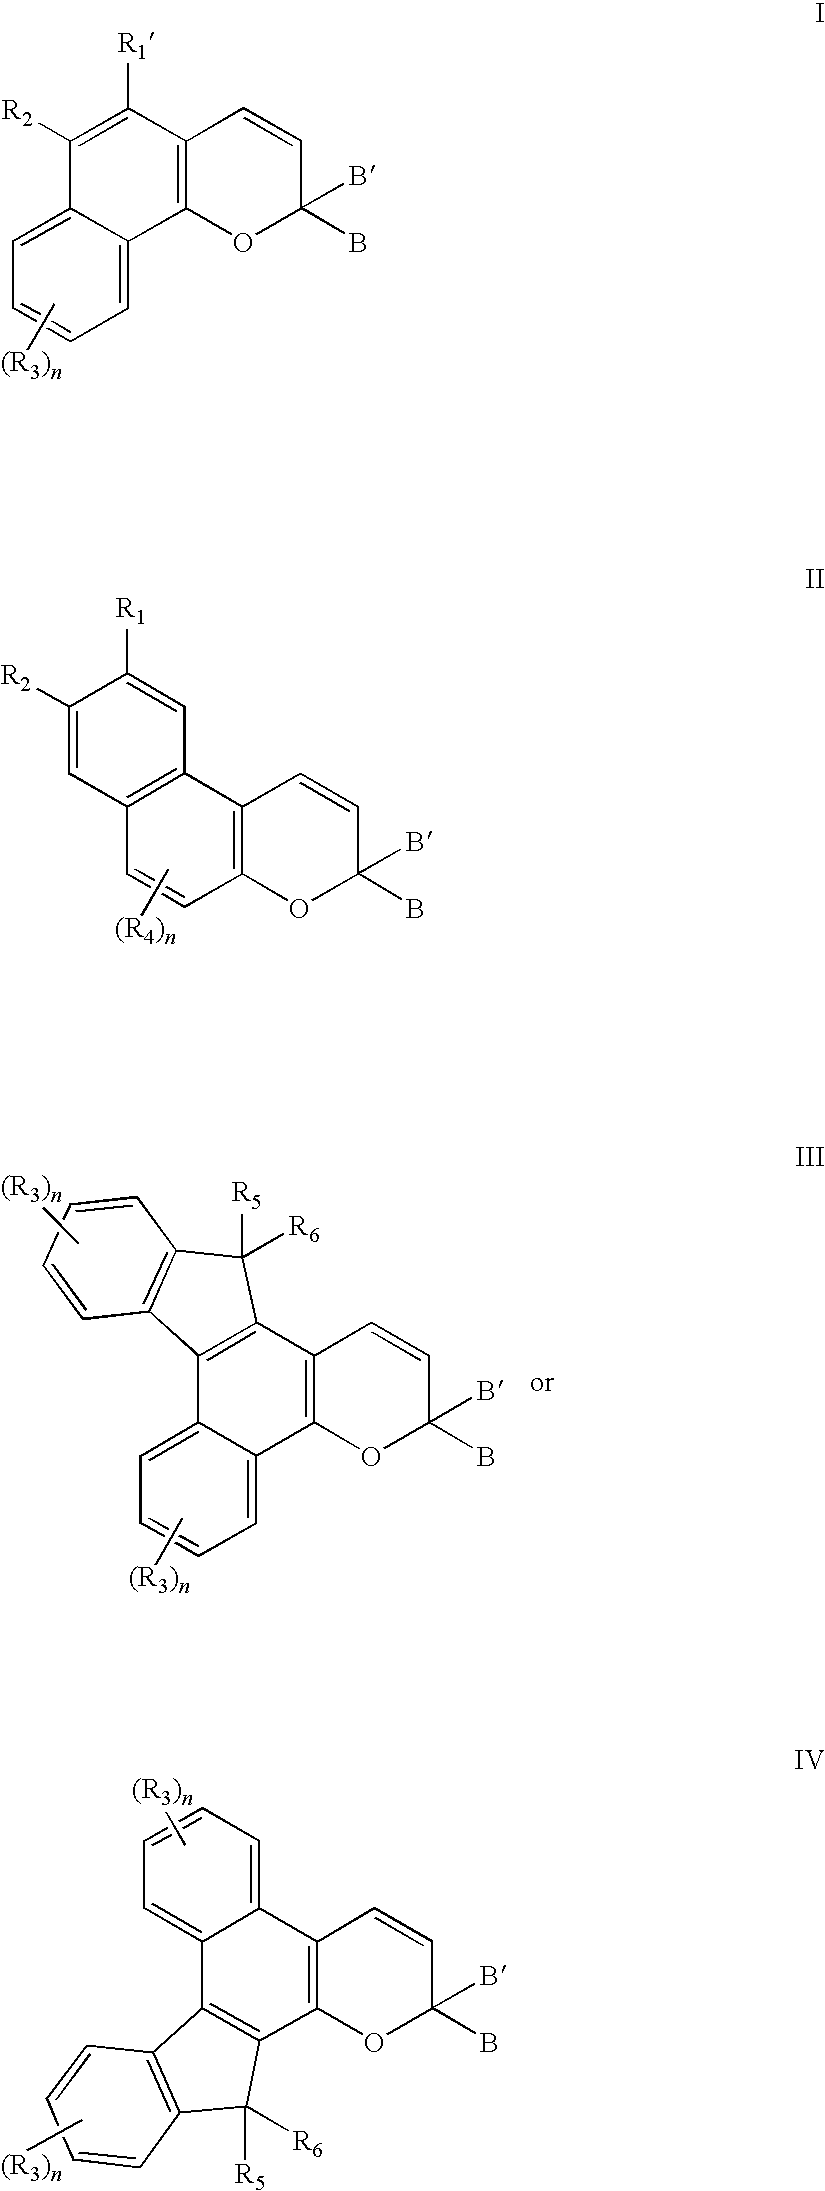 Photochromic materials with reactive substituents